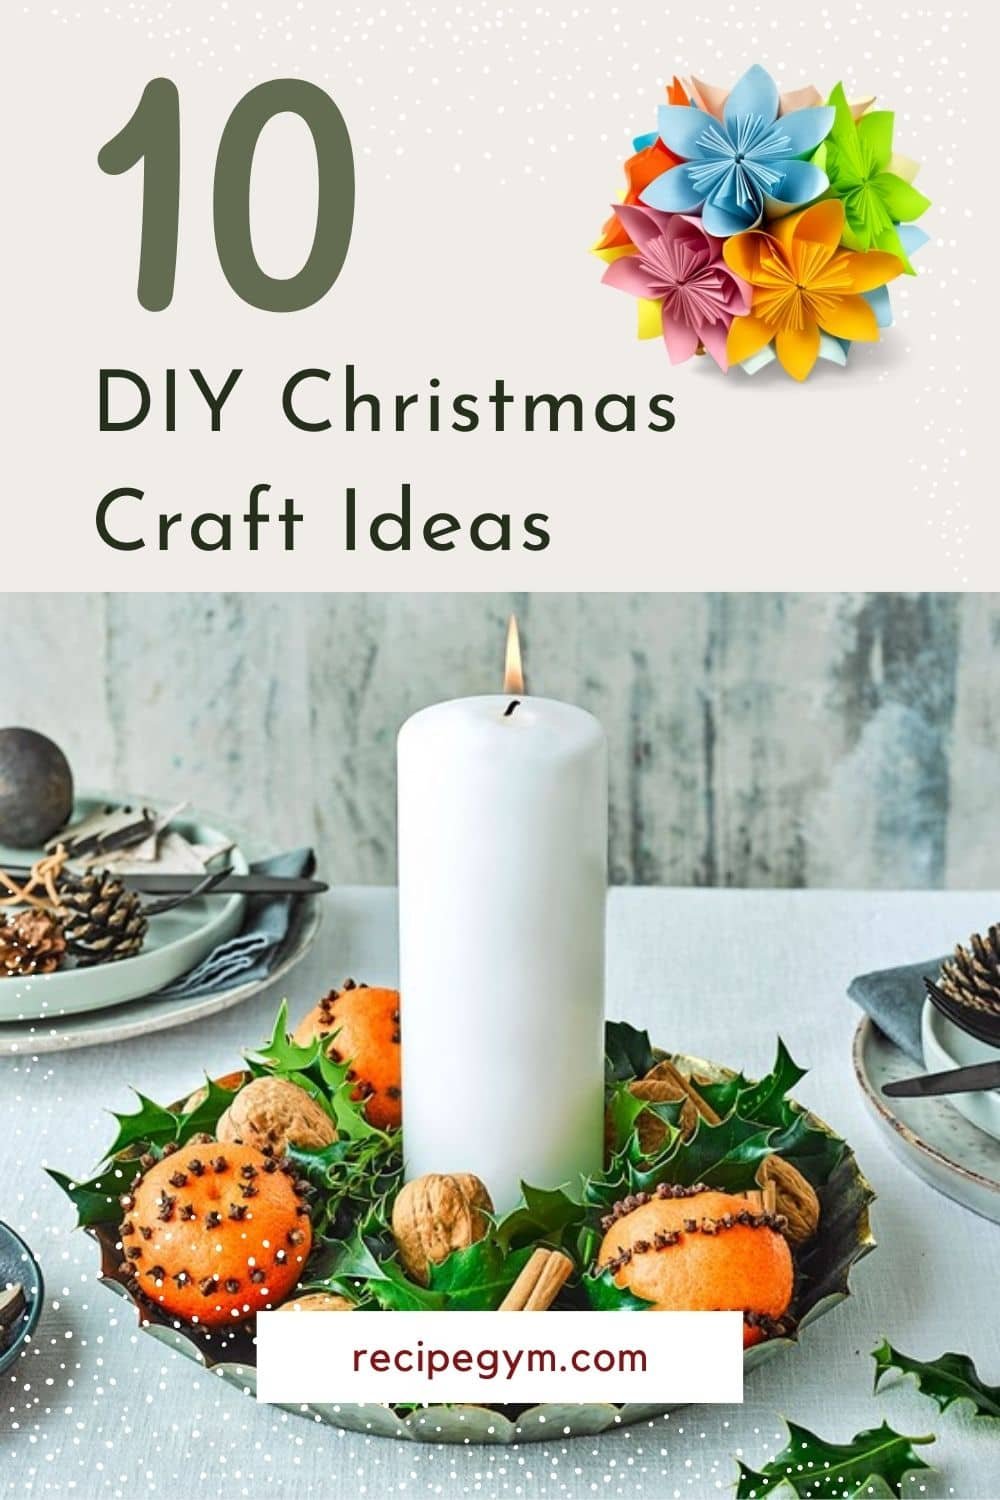 DIY Christmas Craft Ideas for Adults